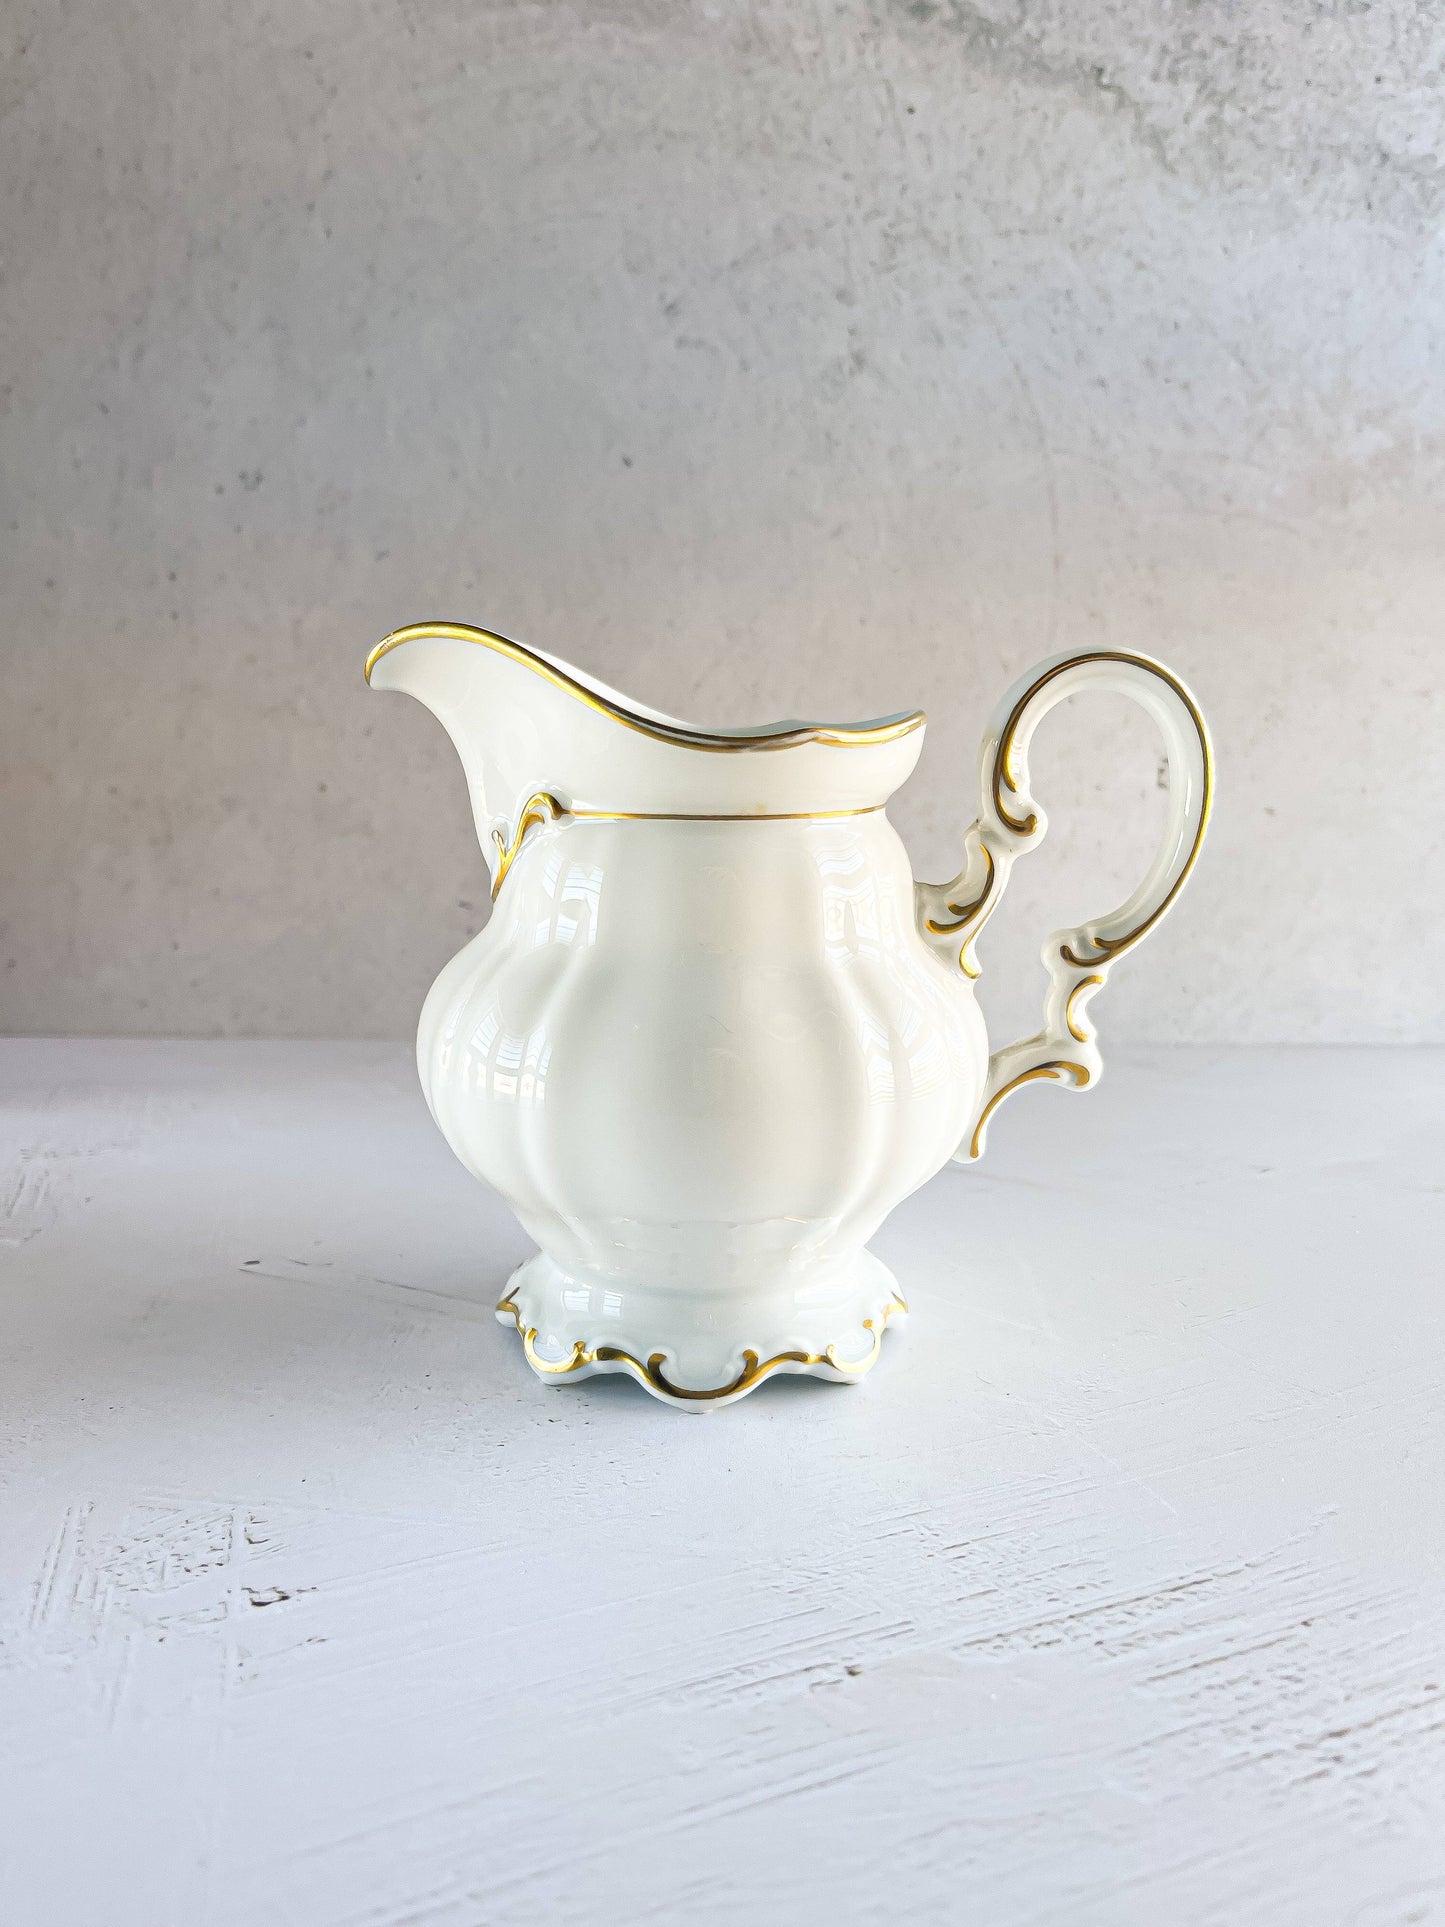 Hutschenreuther Creamer & Mustard Jar (Sugar Bowl Replacement) with Lid & Tray Set - 'Brighton' Collection - SOSC Home